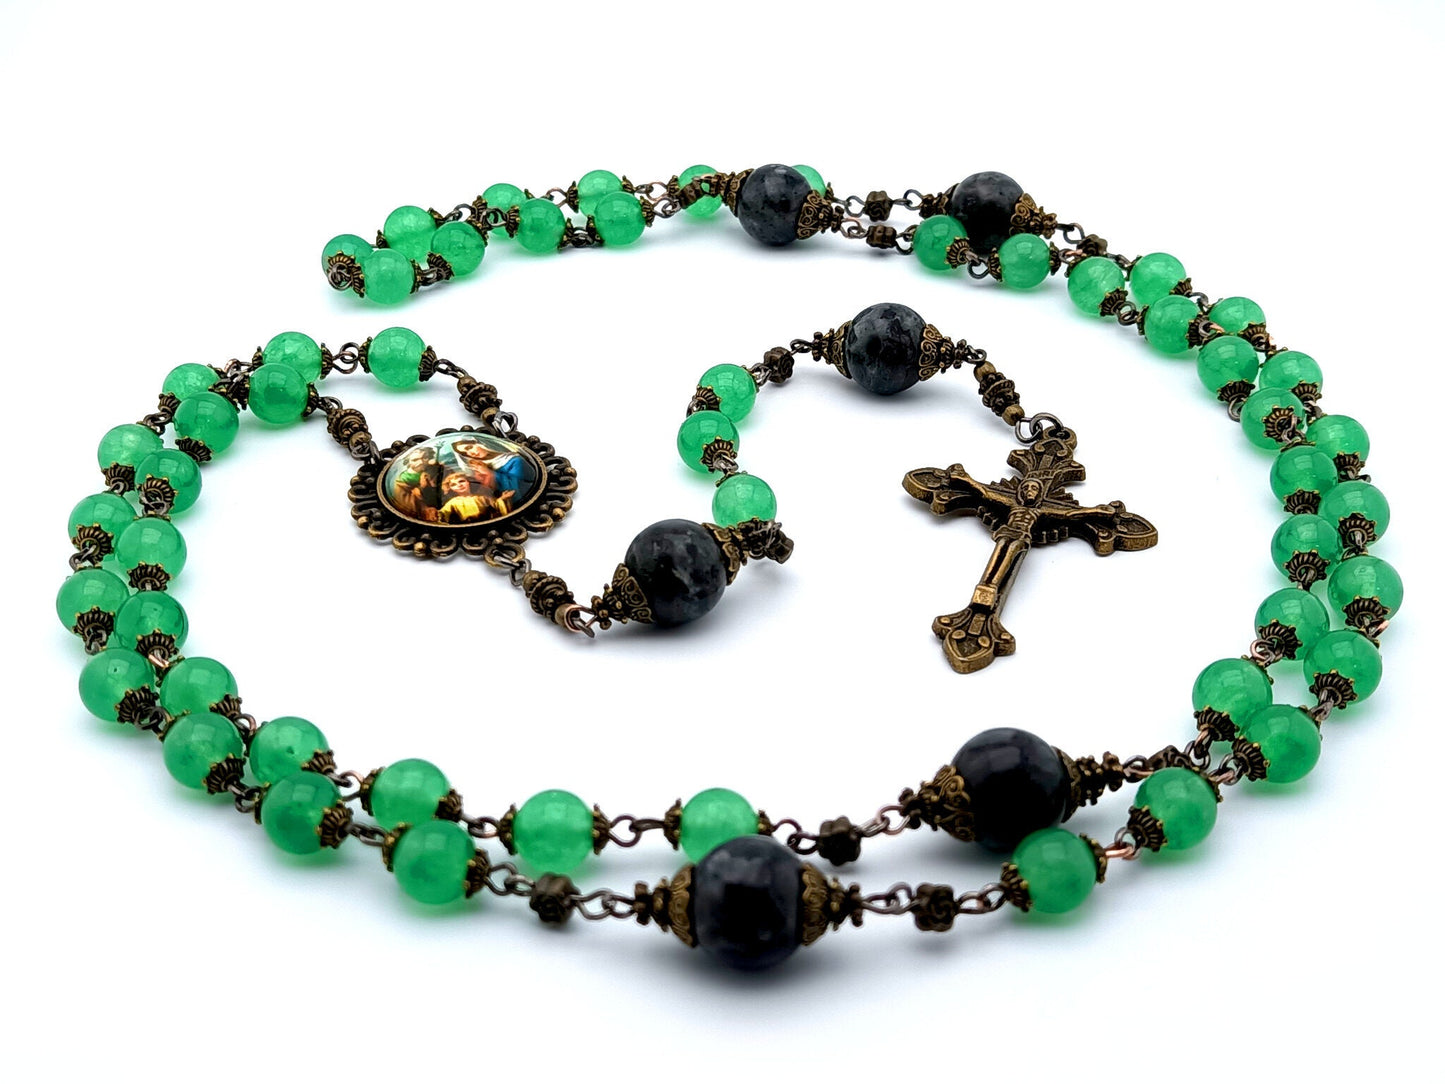 Holy Family unique rosary beads with green jade gemstone beads, bronze crucifix, picture centre medal and labradorite pater beads.